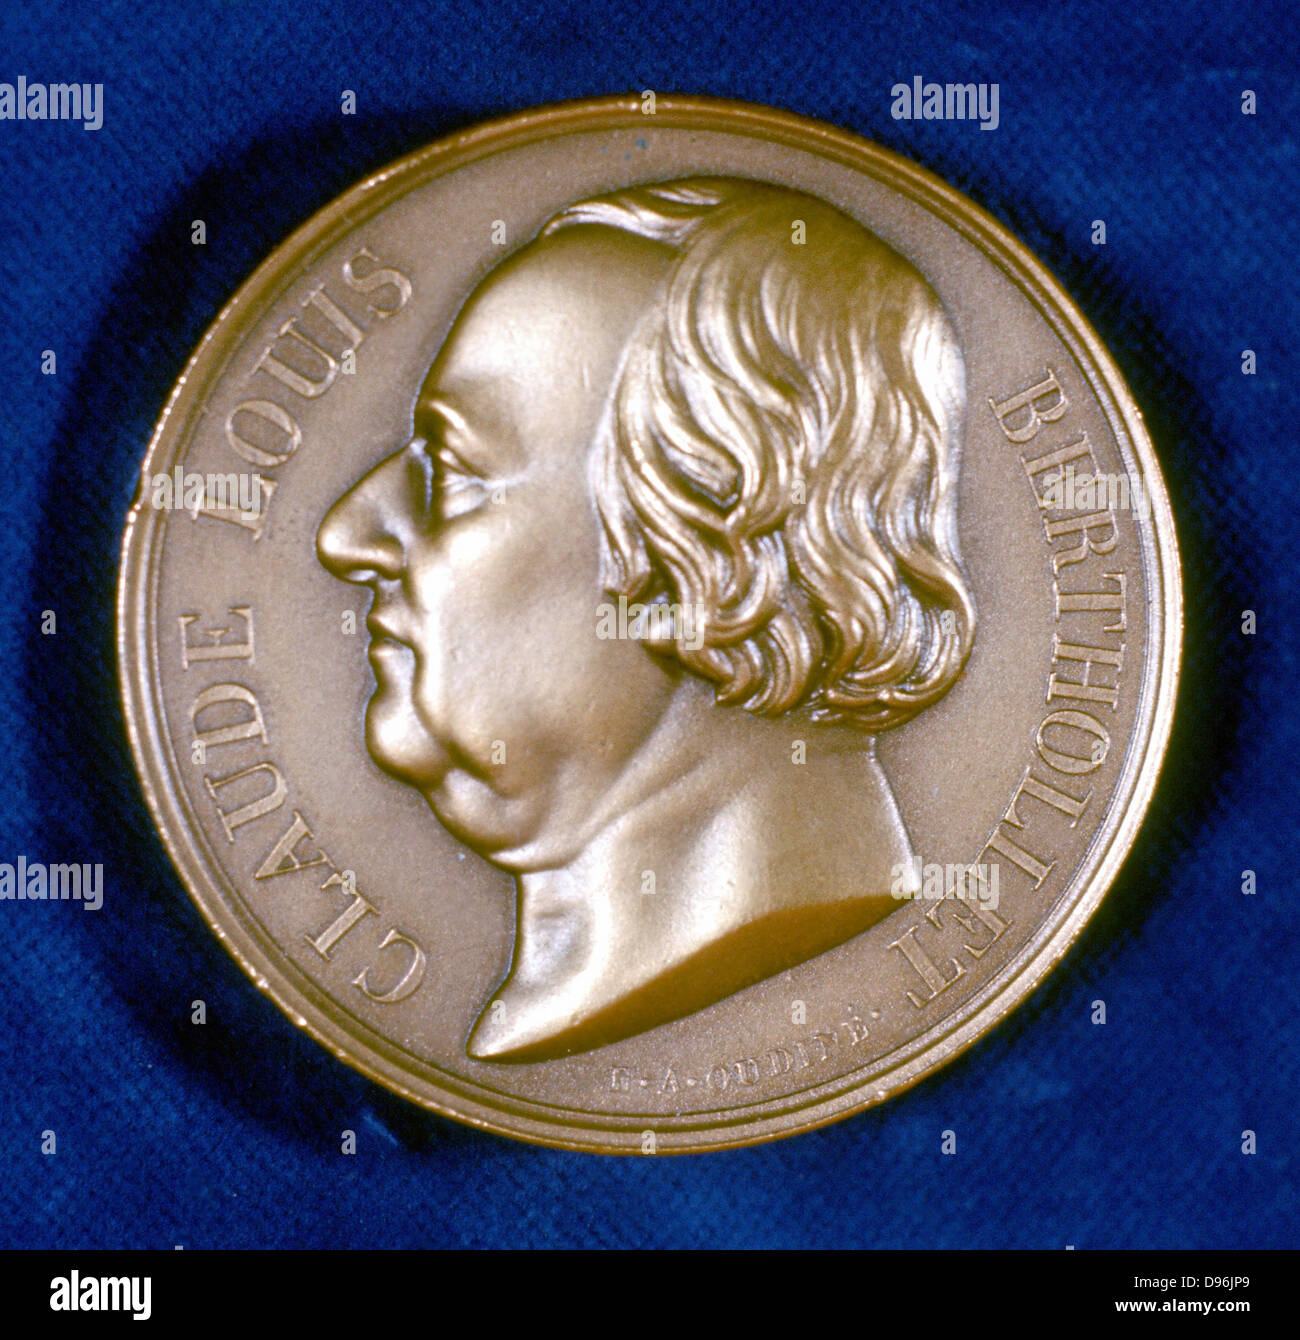 Claude Louis Berthollet (1748-1822) French chemist. Portrait from obverse of commemorative medal. Stock Photo